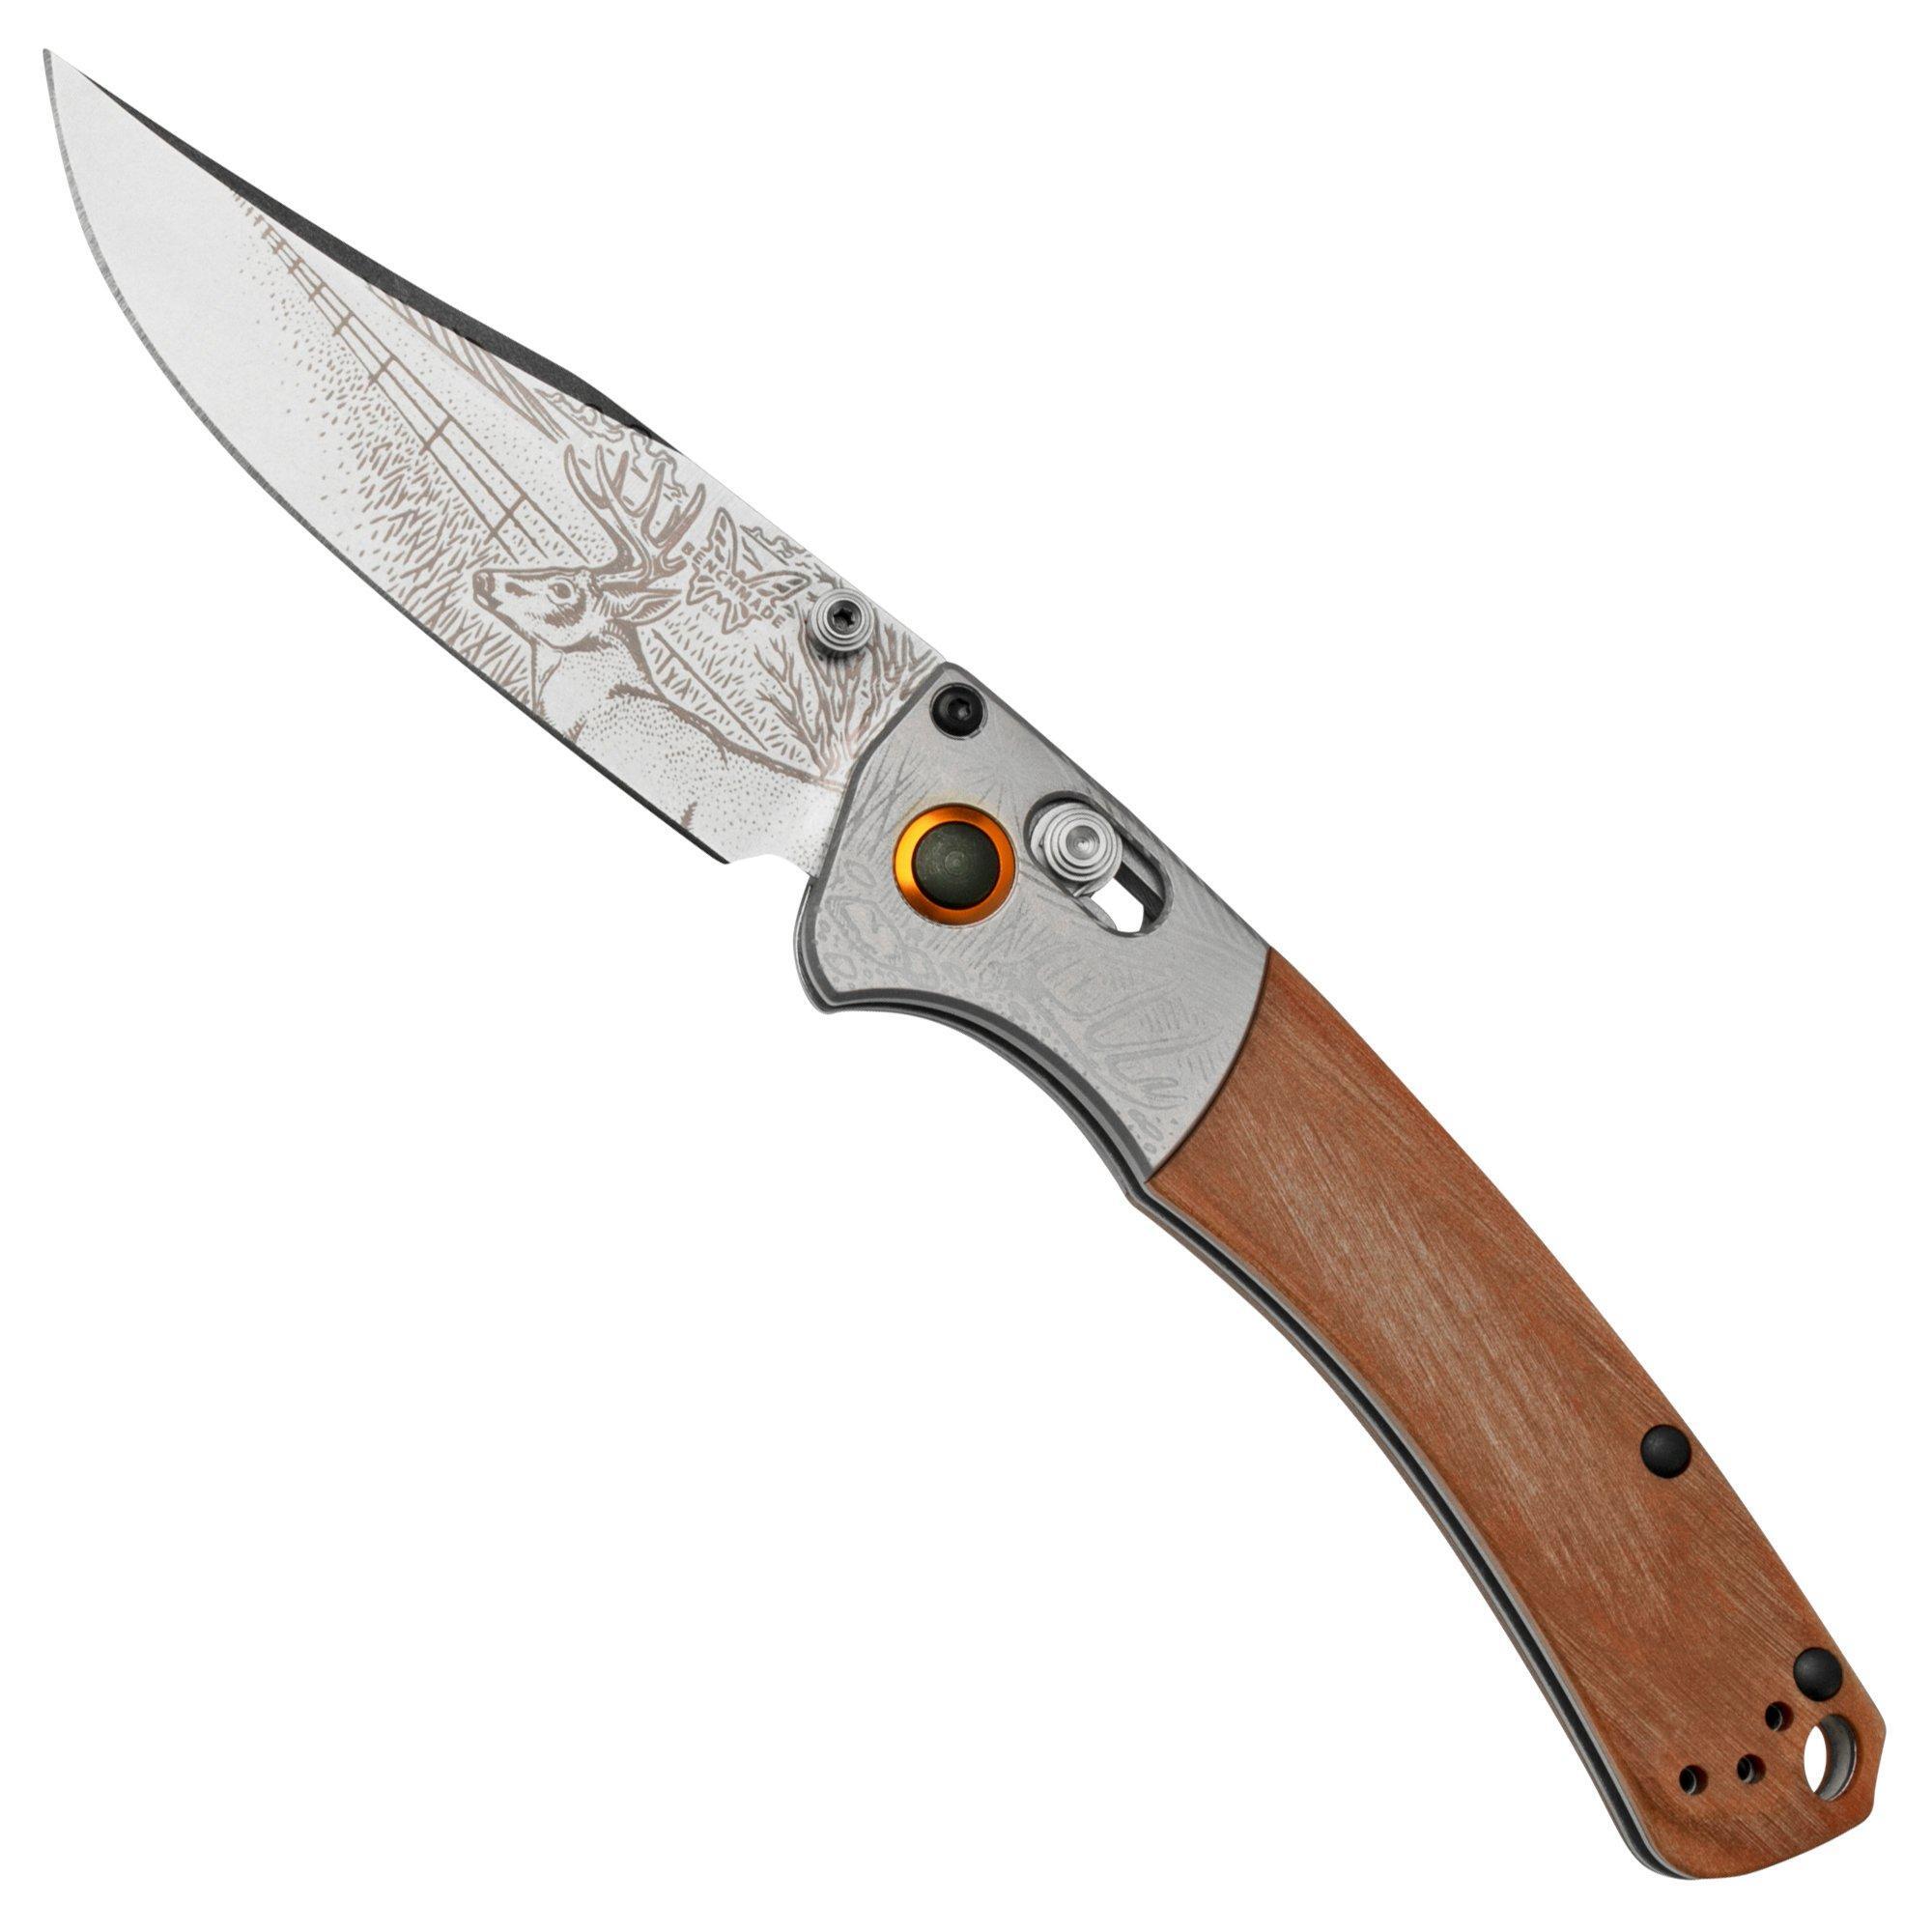 Benchmade Benchmade Mini Crooked River Whitetail Limited Edition Artist Series 15085-2202, jachtzakmes, Casey Underwood design